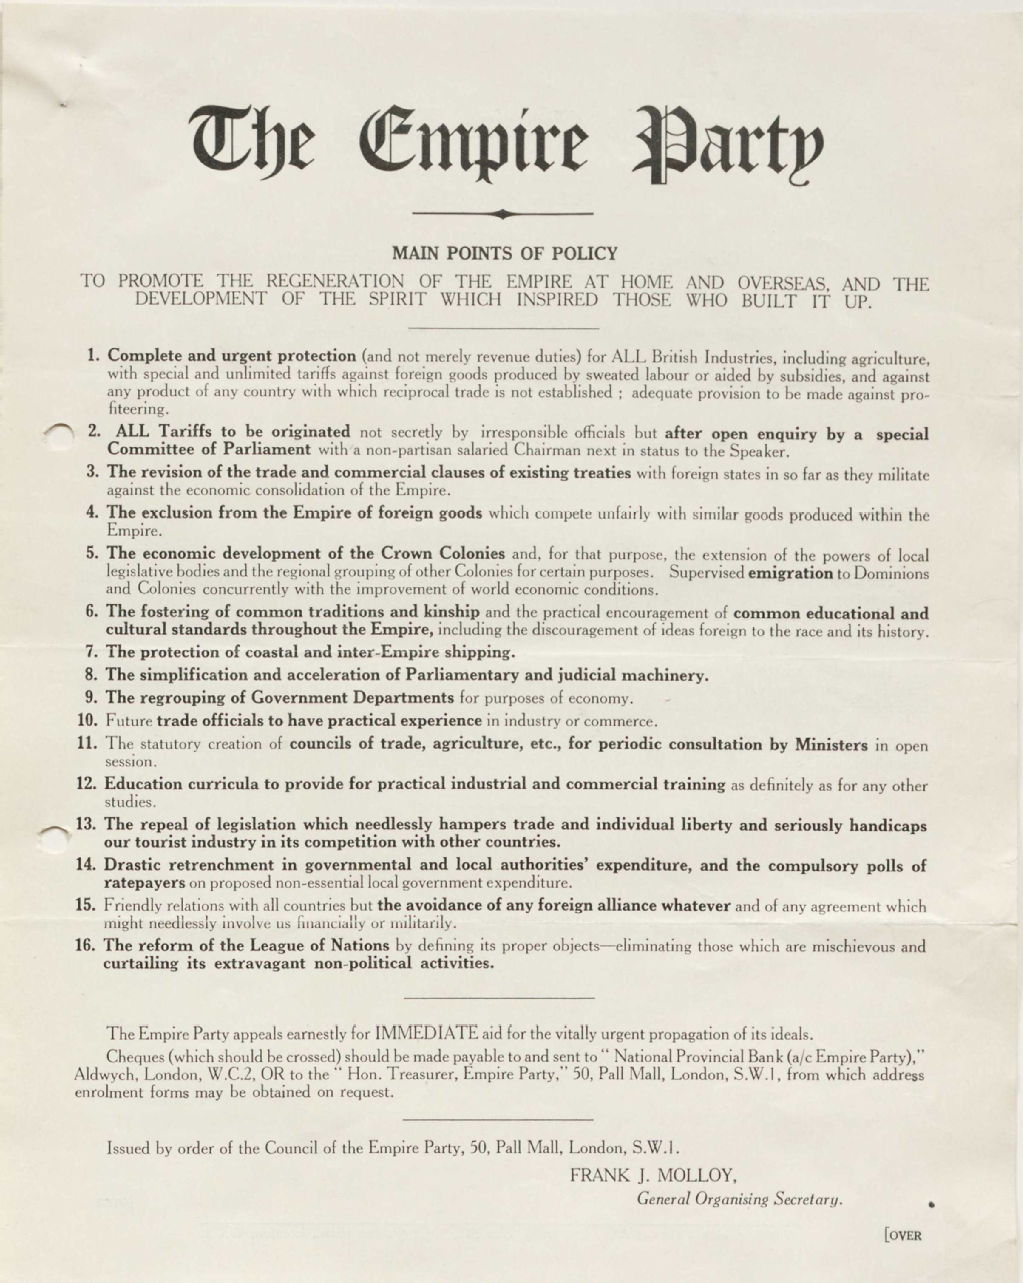 The Empire Party: Main points of policy, 1932